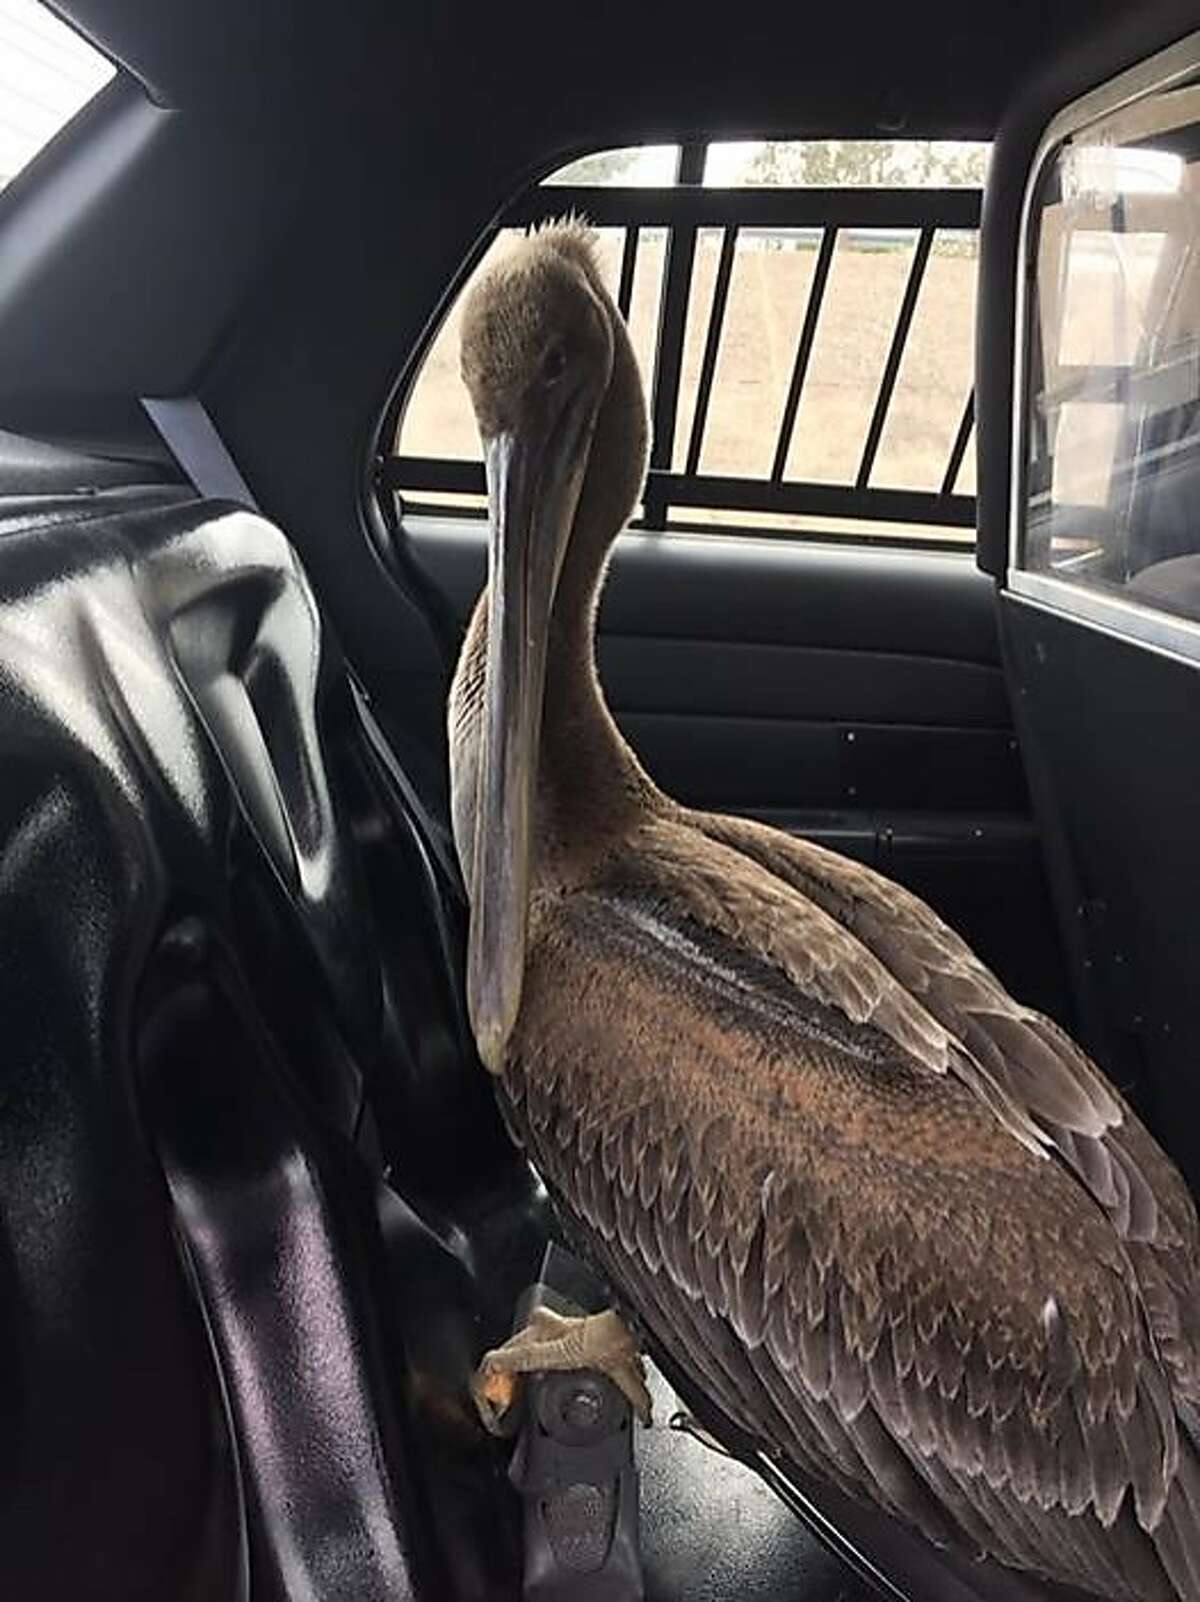 Pelican in the back seat of the police car